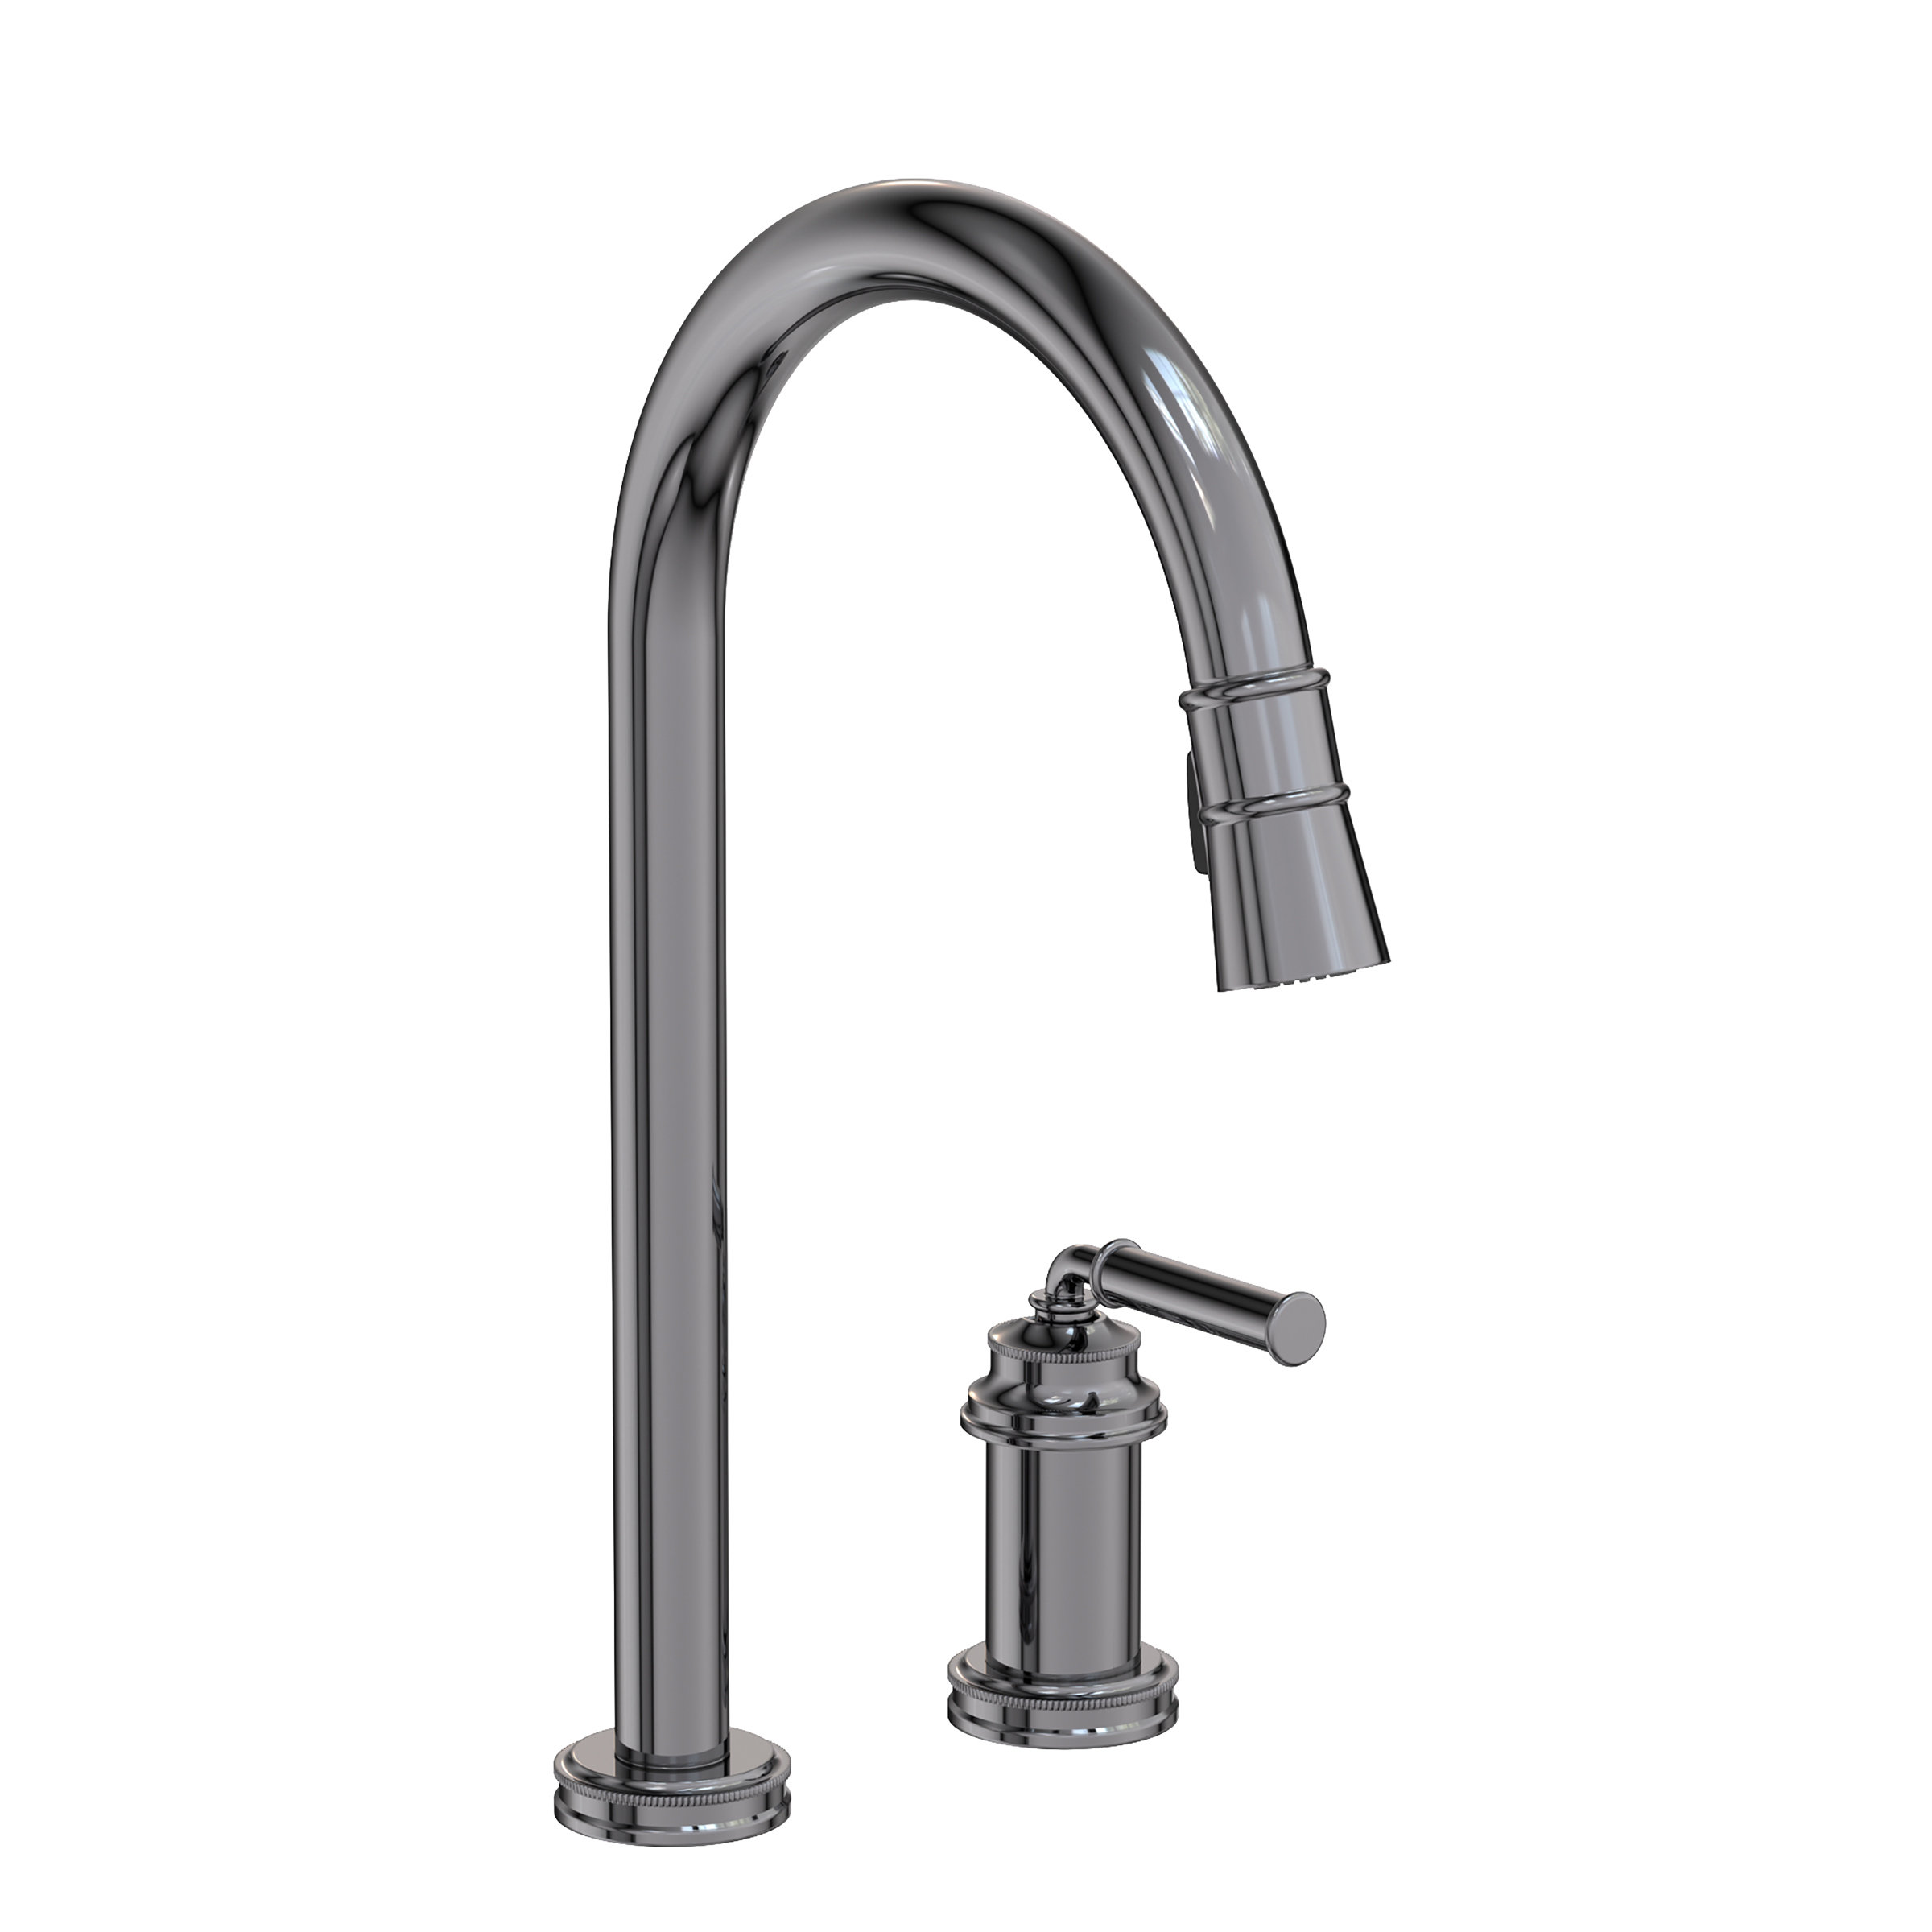 Pull down Single Handle Kitchen Faucet with Deck Plate